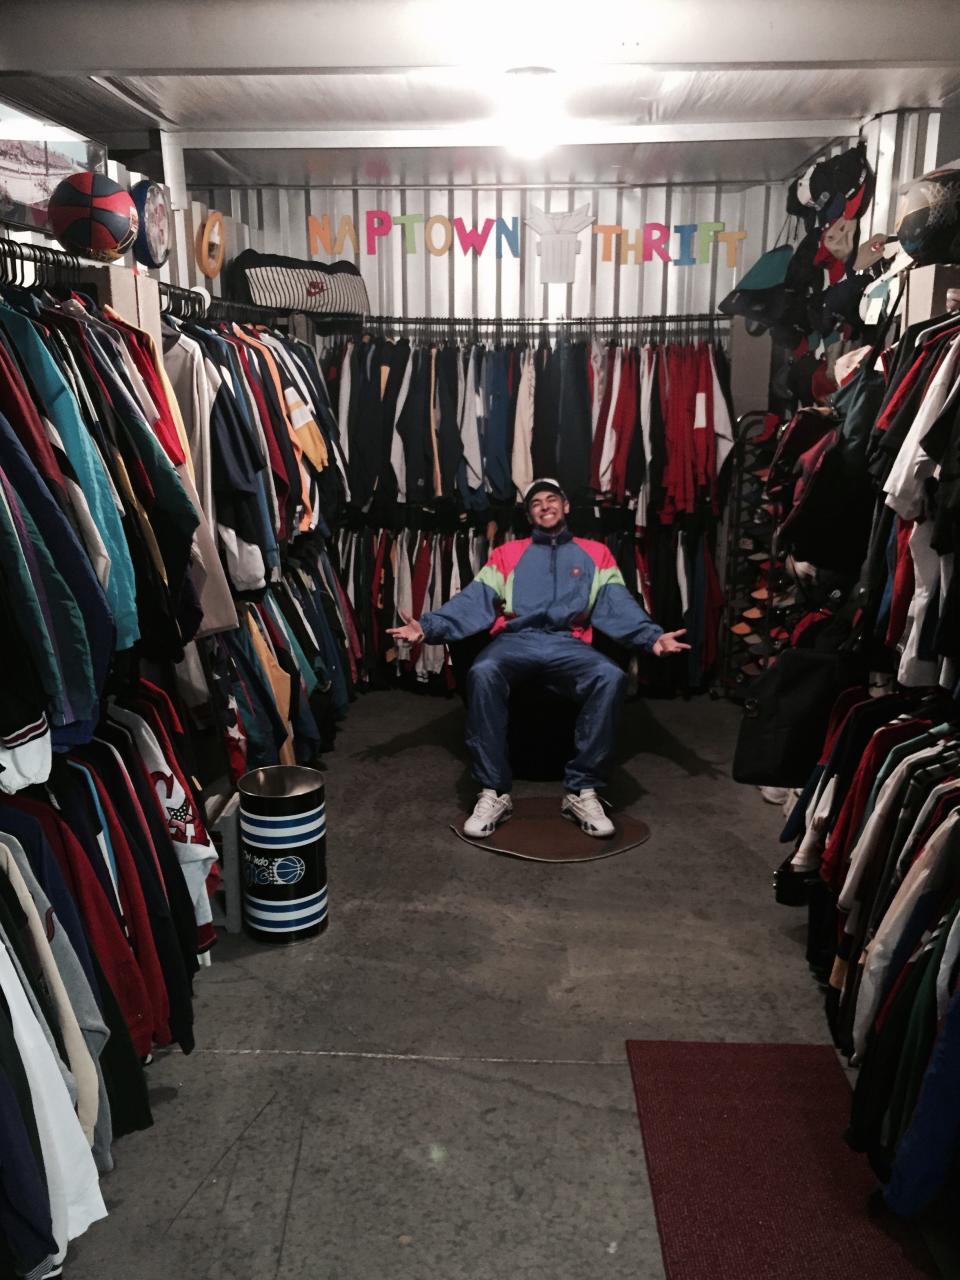 As Naptown Thrift began to grow, so did the storage unit.